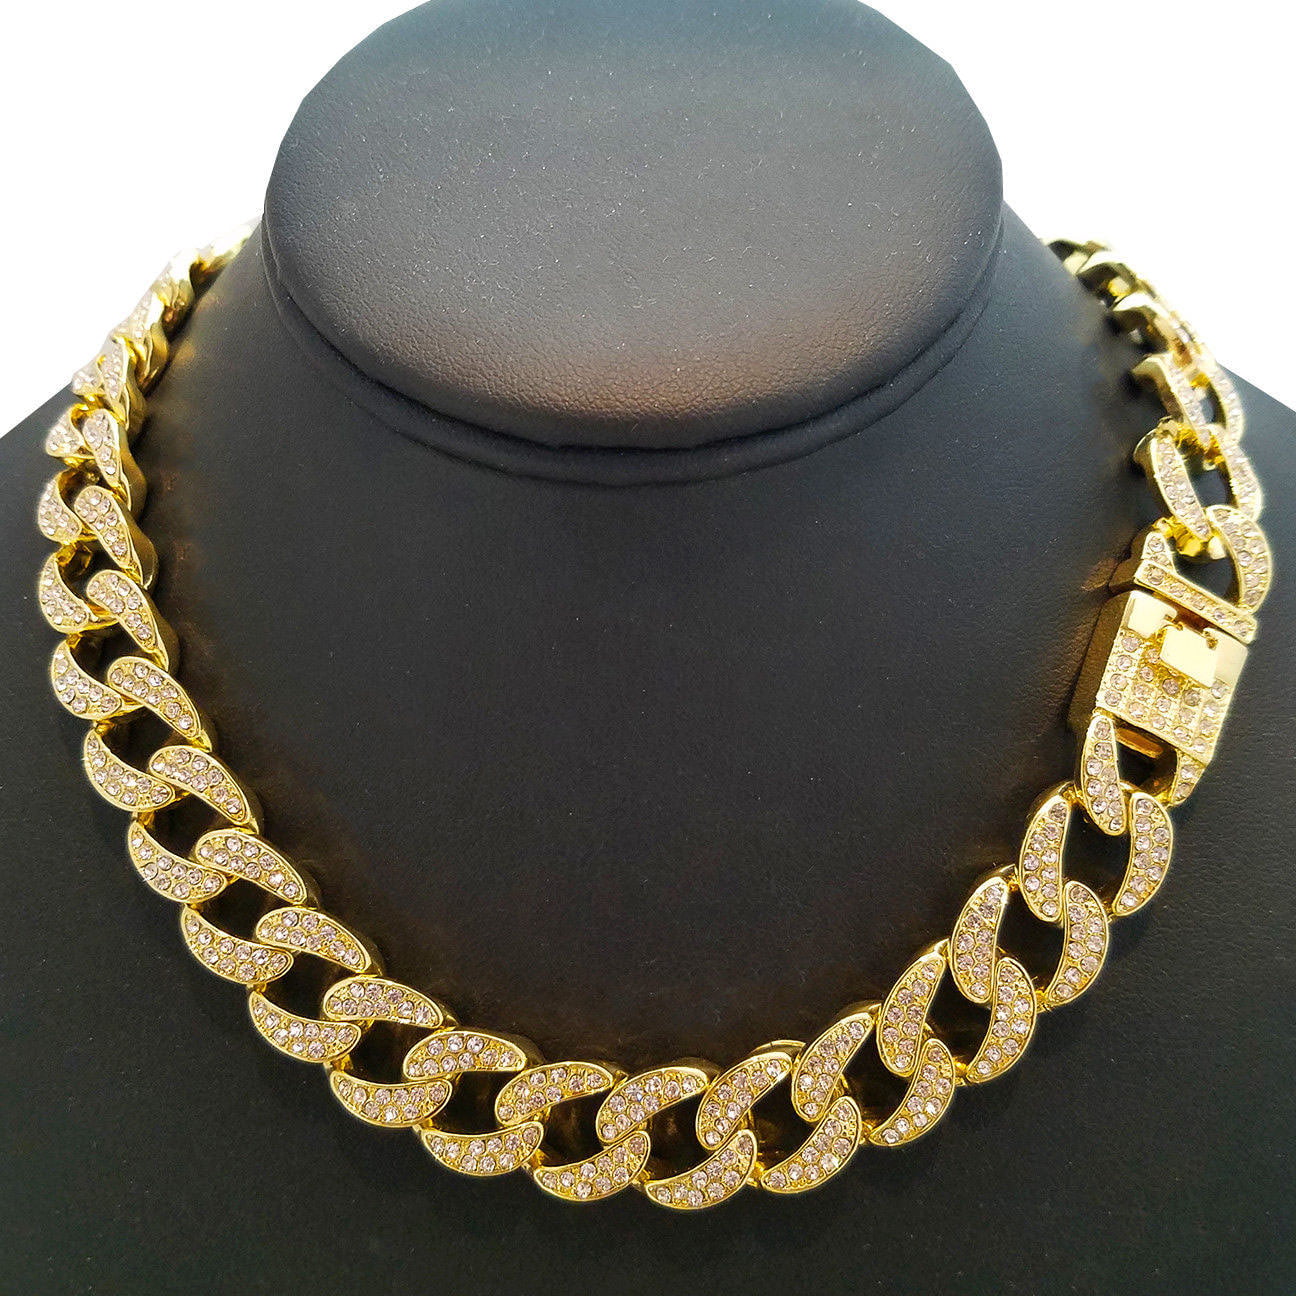 Real 14k Gold Filled Old School Hammered OS Cuban Curb Link Chain Necklace w/Box 